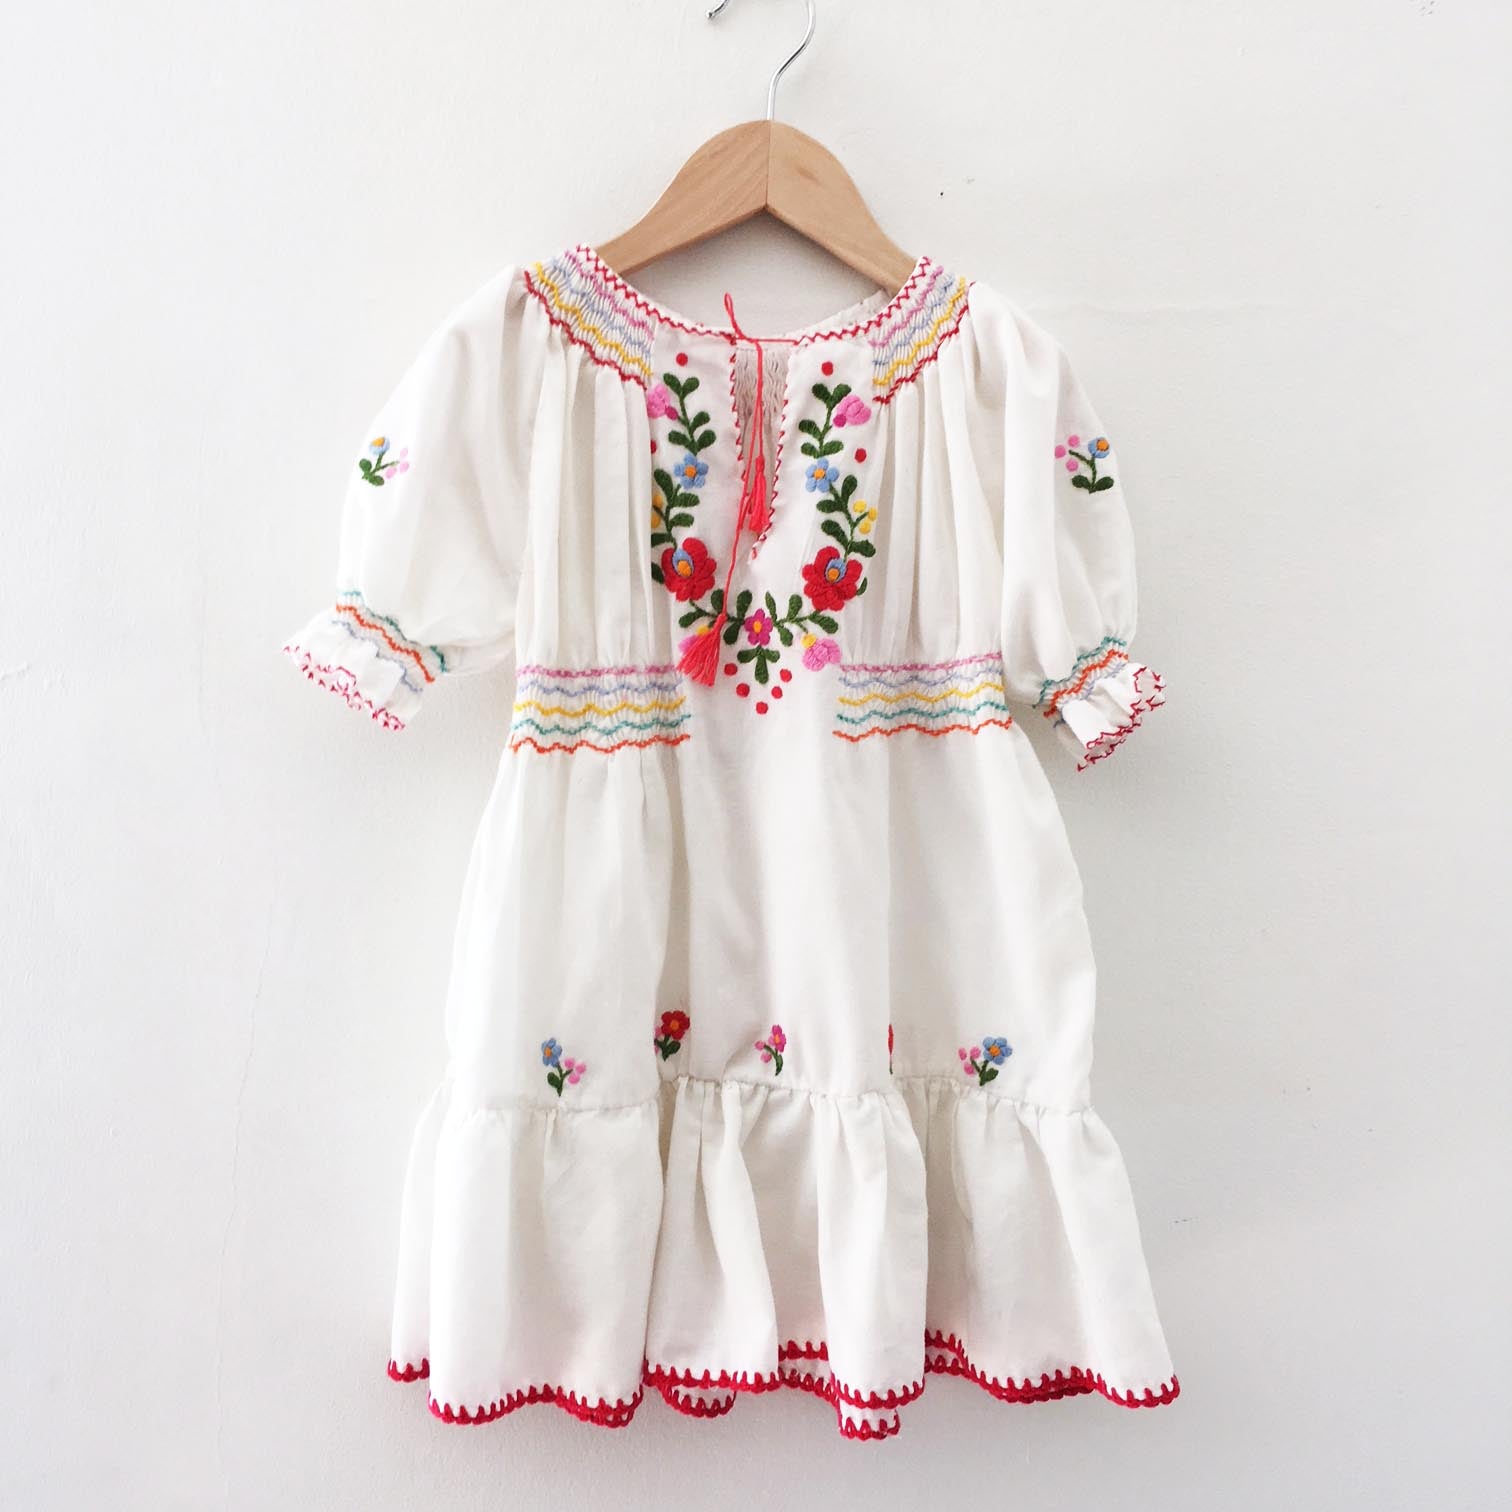 Vintage embroidered peasant dress size 3-4